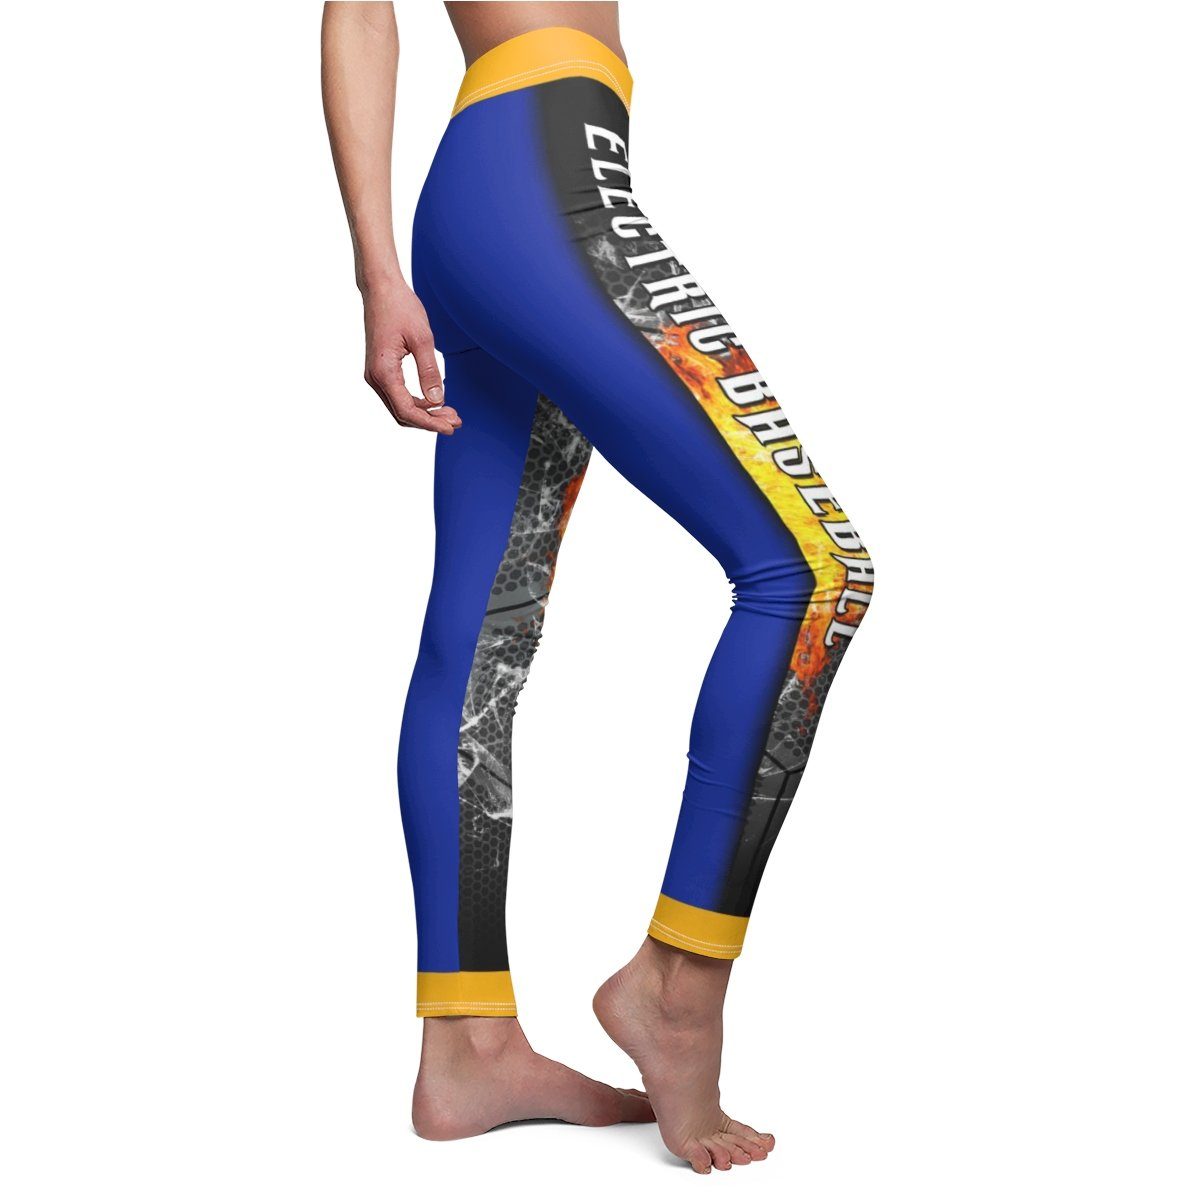 Grid Fire - V.3 - Extreme Sportswear Cut & Sew Leggings Template-Photoshop Template - Photo Solutions